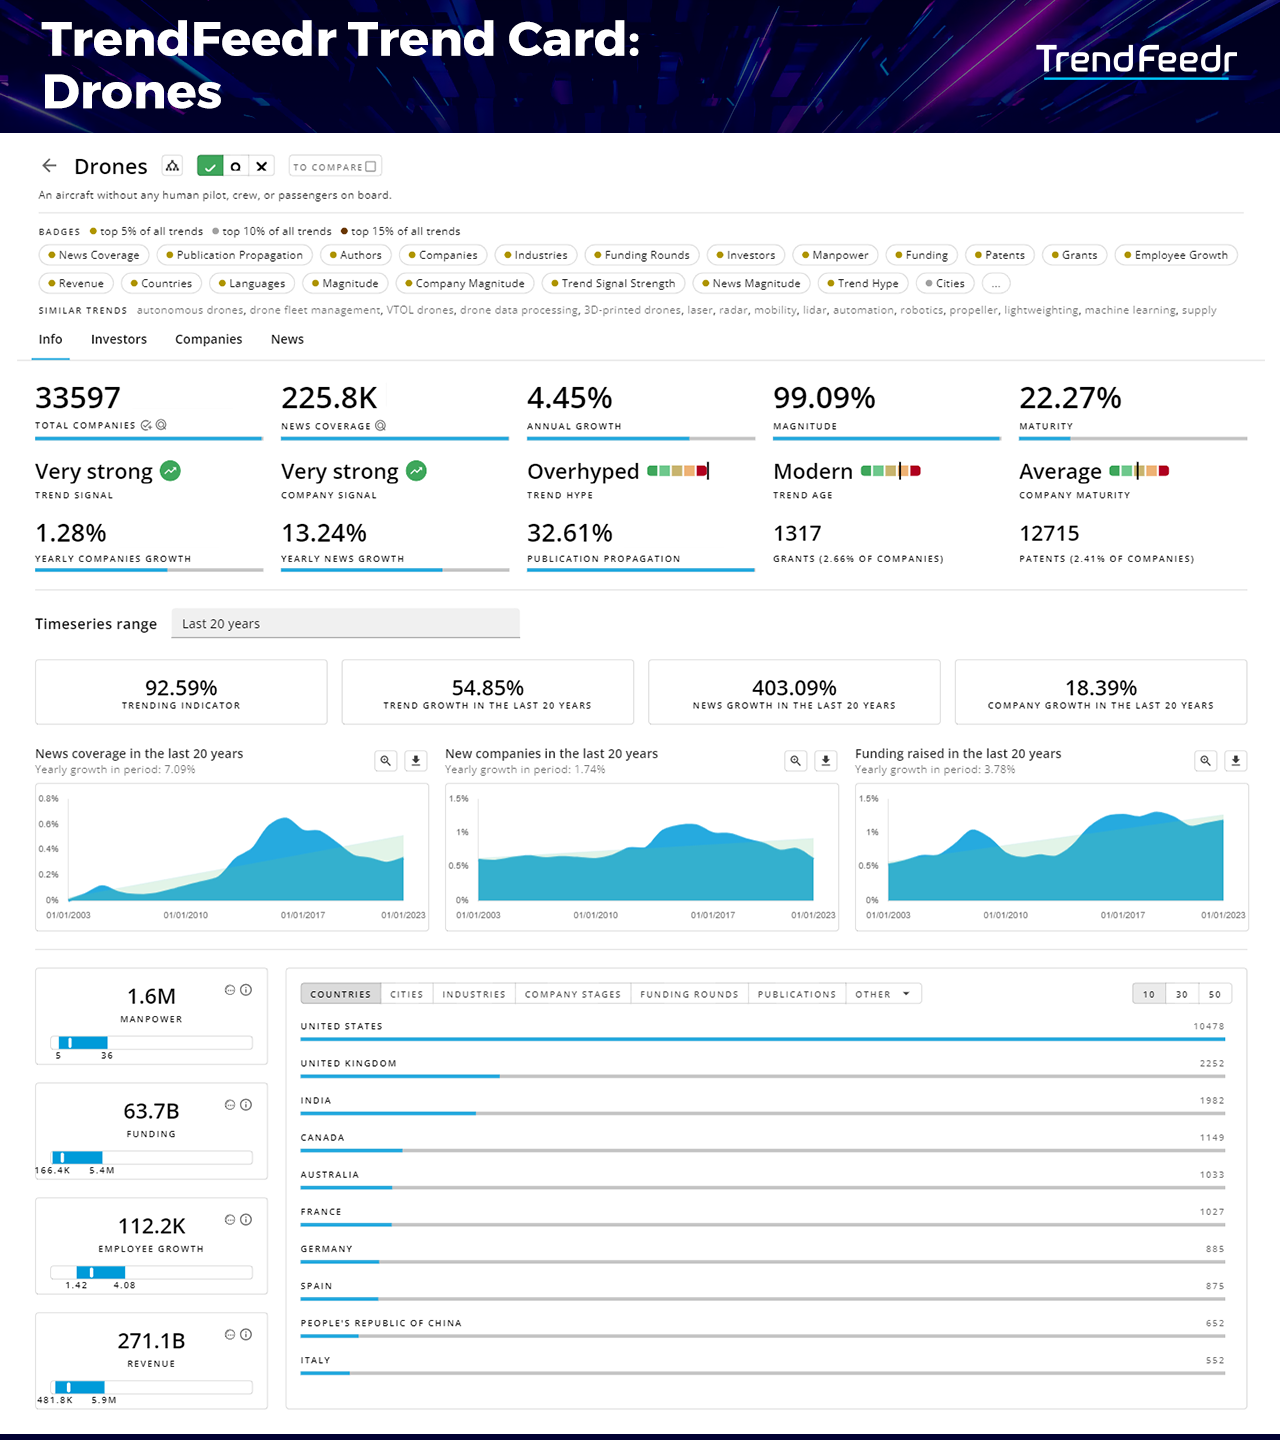 Drone-Trends-Trend-Card-TrendFeedr-noresize